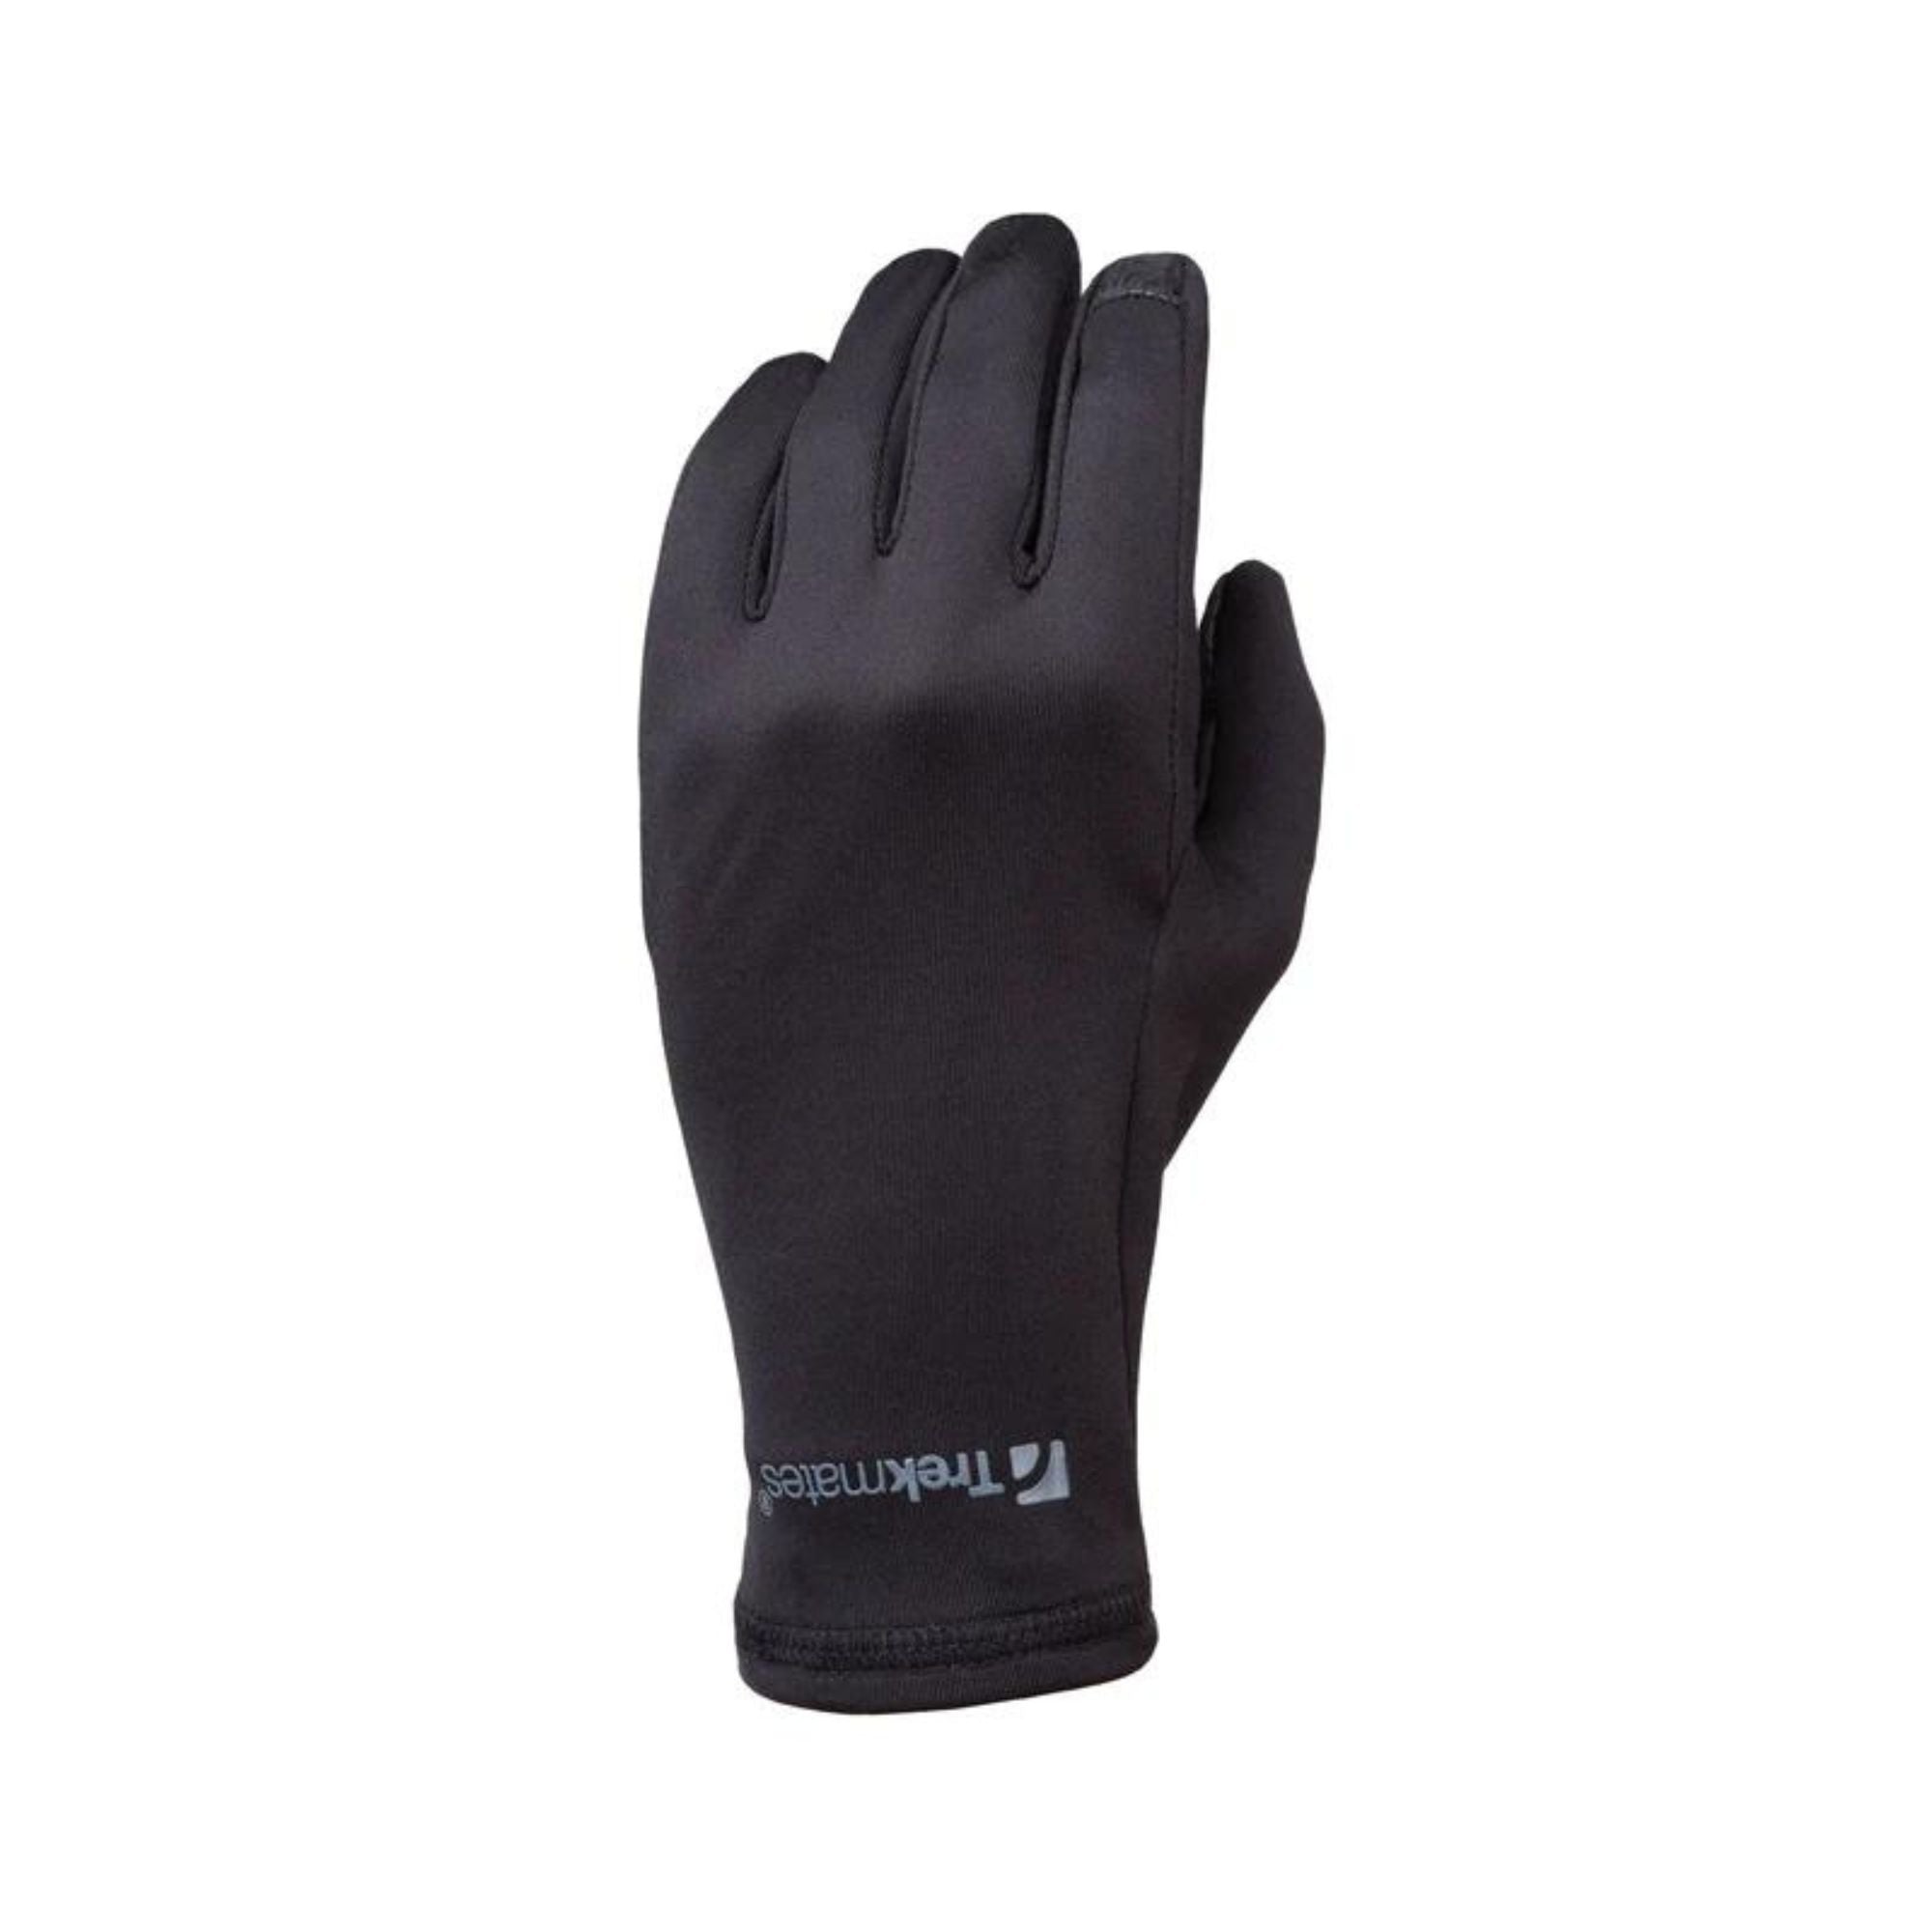 Trekmates Tryfan Stretch Glove | Trekmates | Portwest - The Outdoor Shop